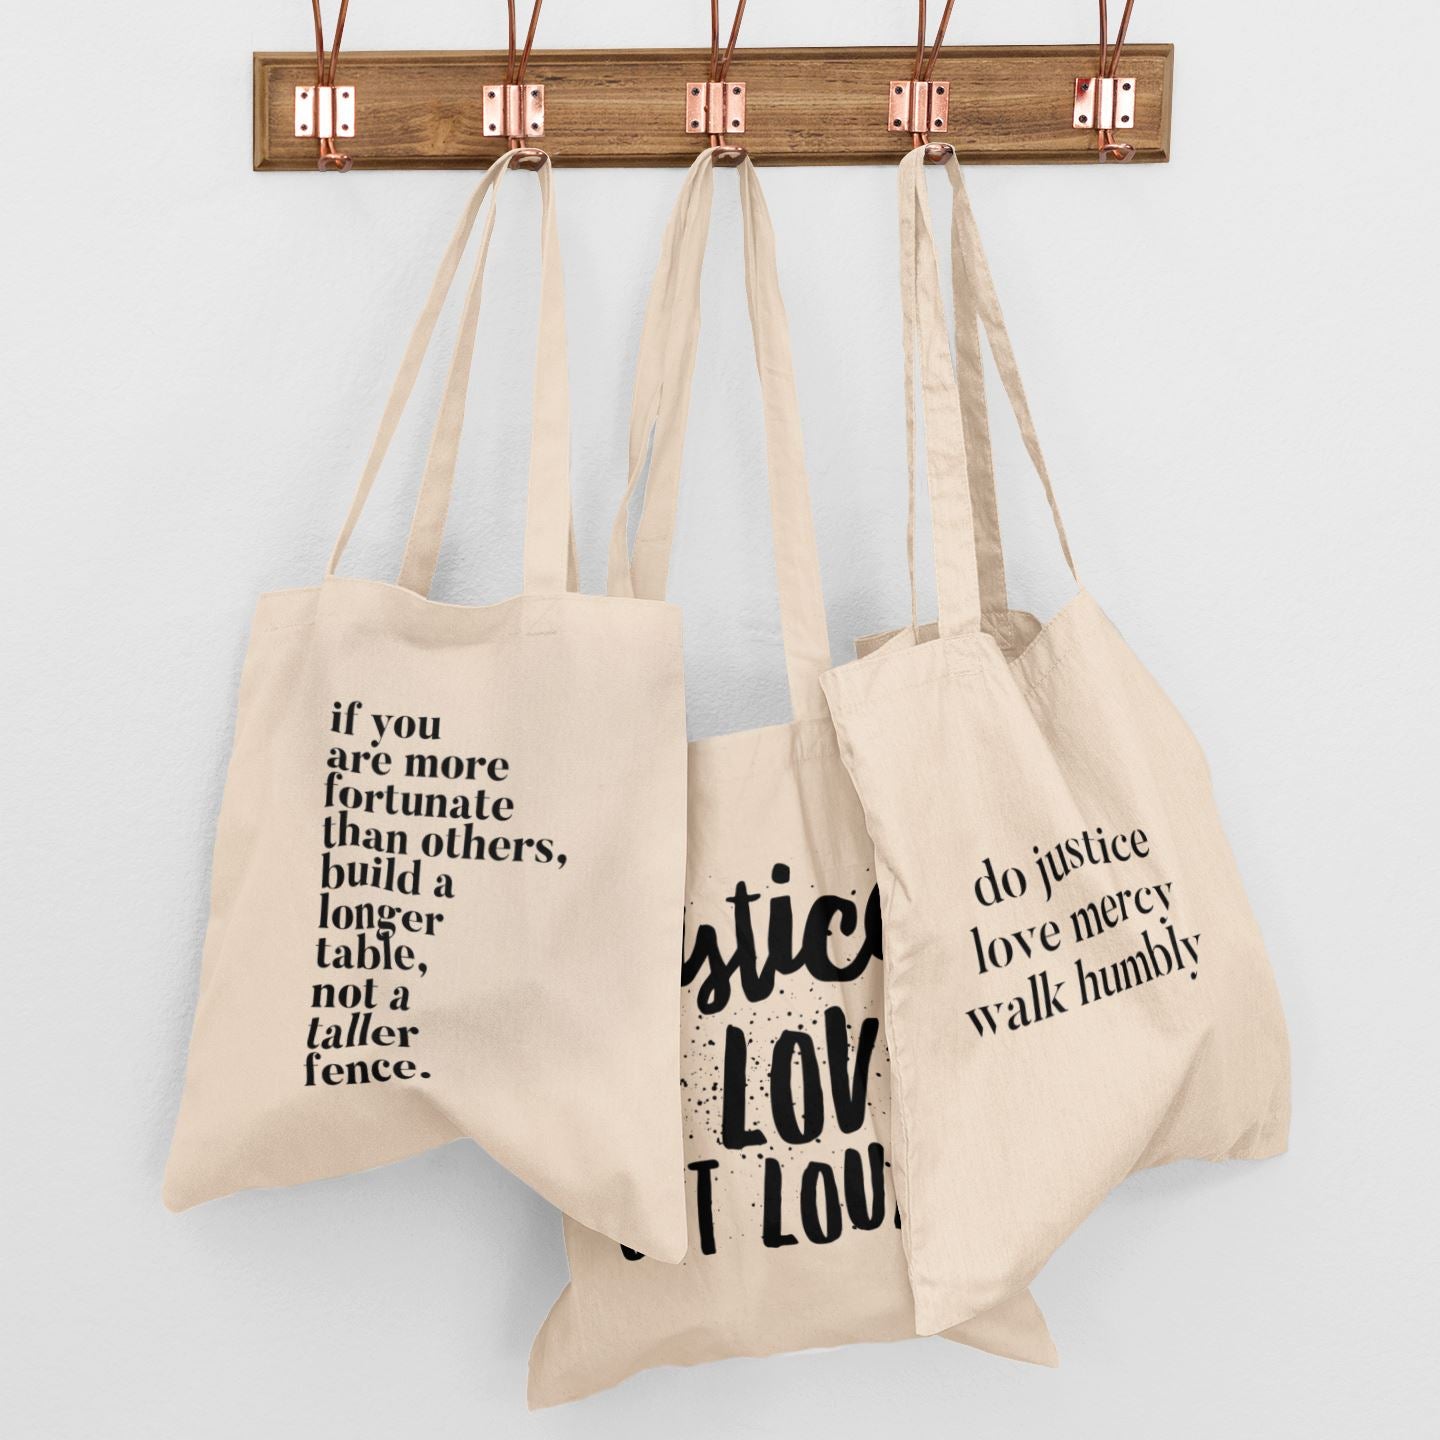 Money Can't Buy Happiness – Crafts/Yarn Tote Bag